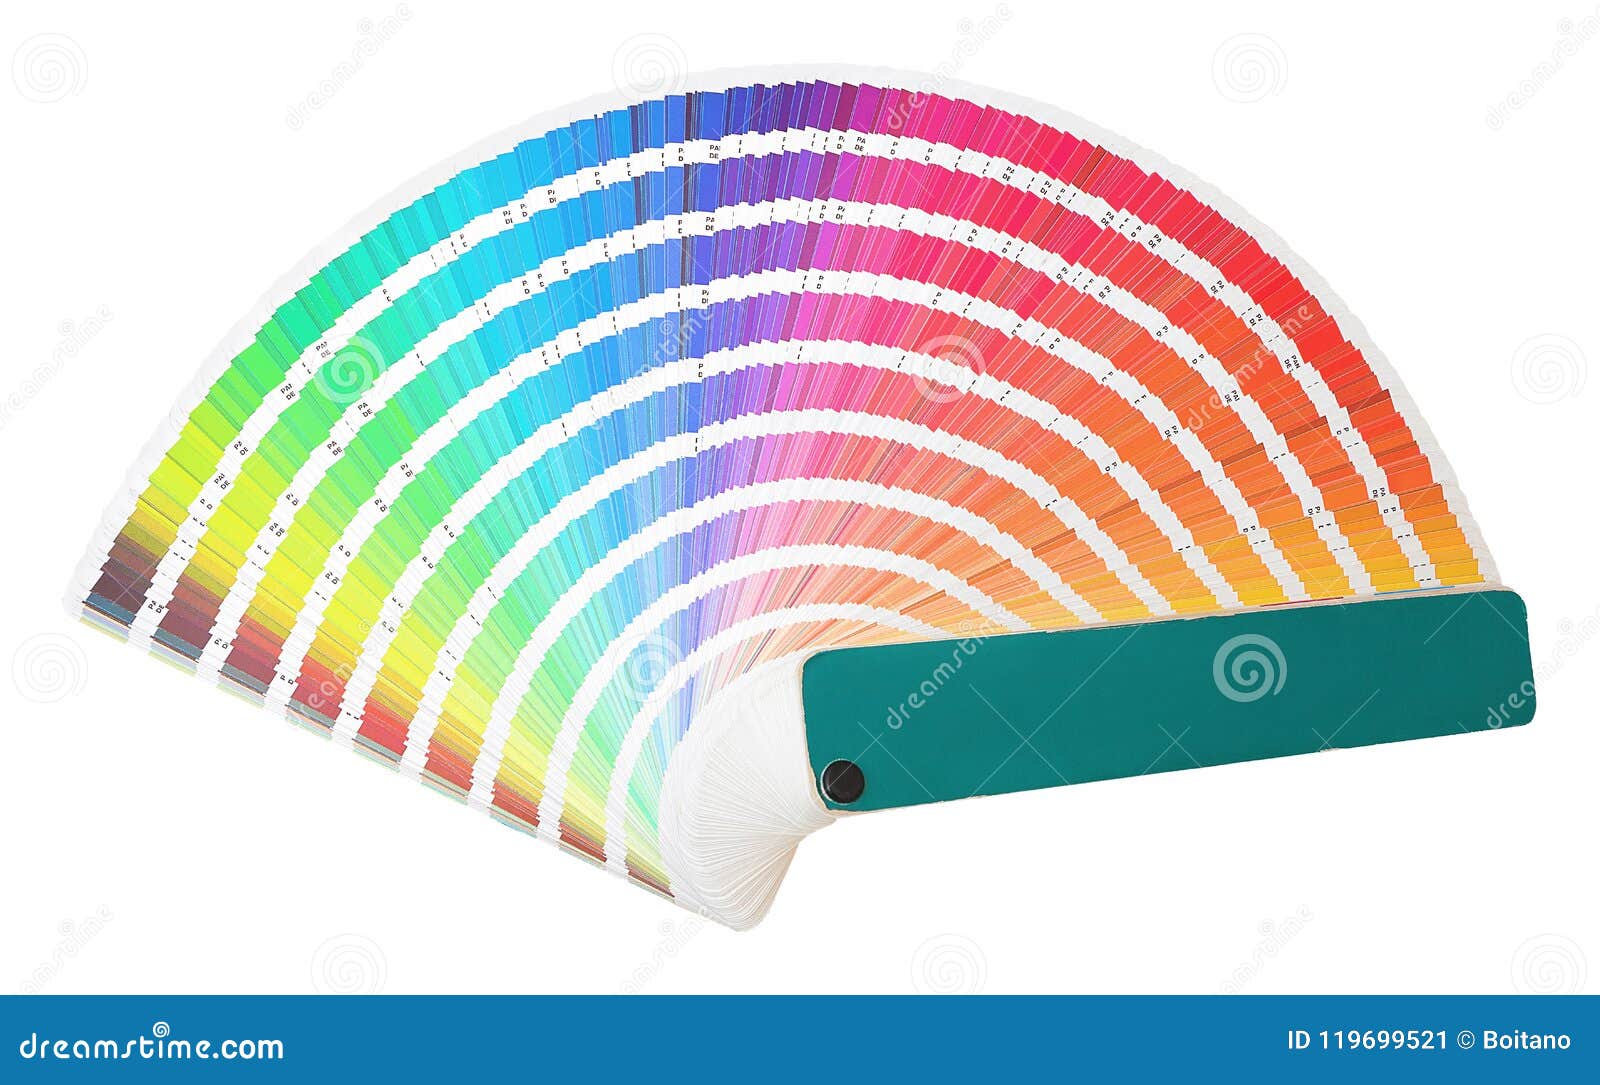 Rainbow Sample Colors Catalogue in Many Shades of Colors or Spectrum  Isolated on White Background. Color Chart with Color Code. Stock Image -  Image of guide, colors: 119699521